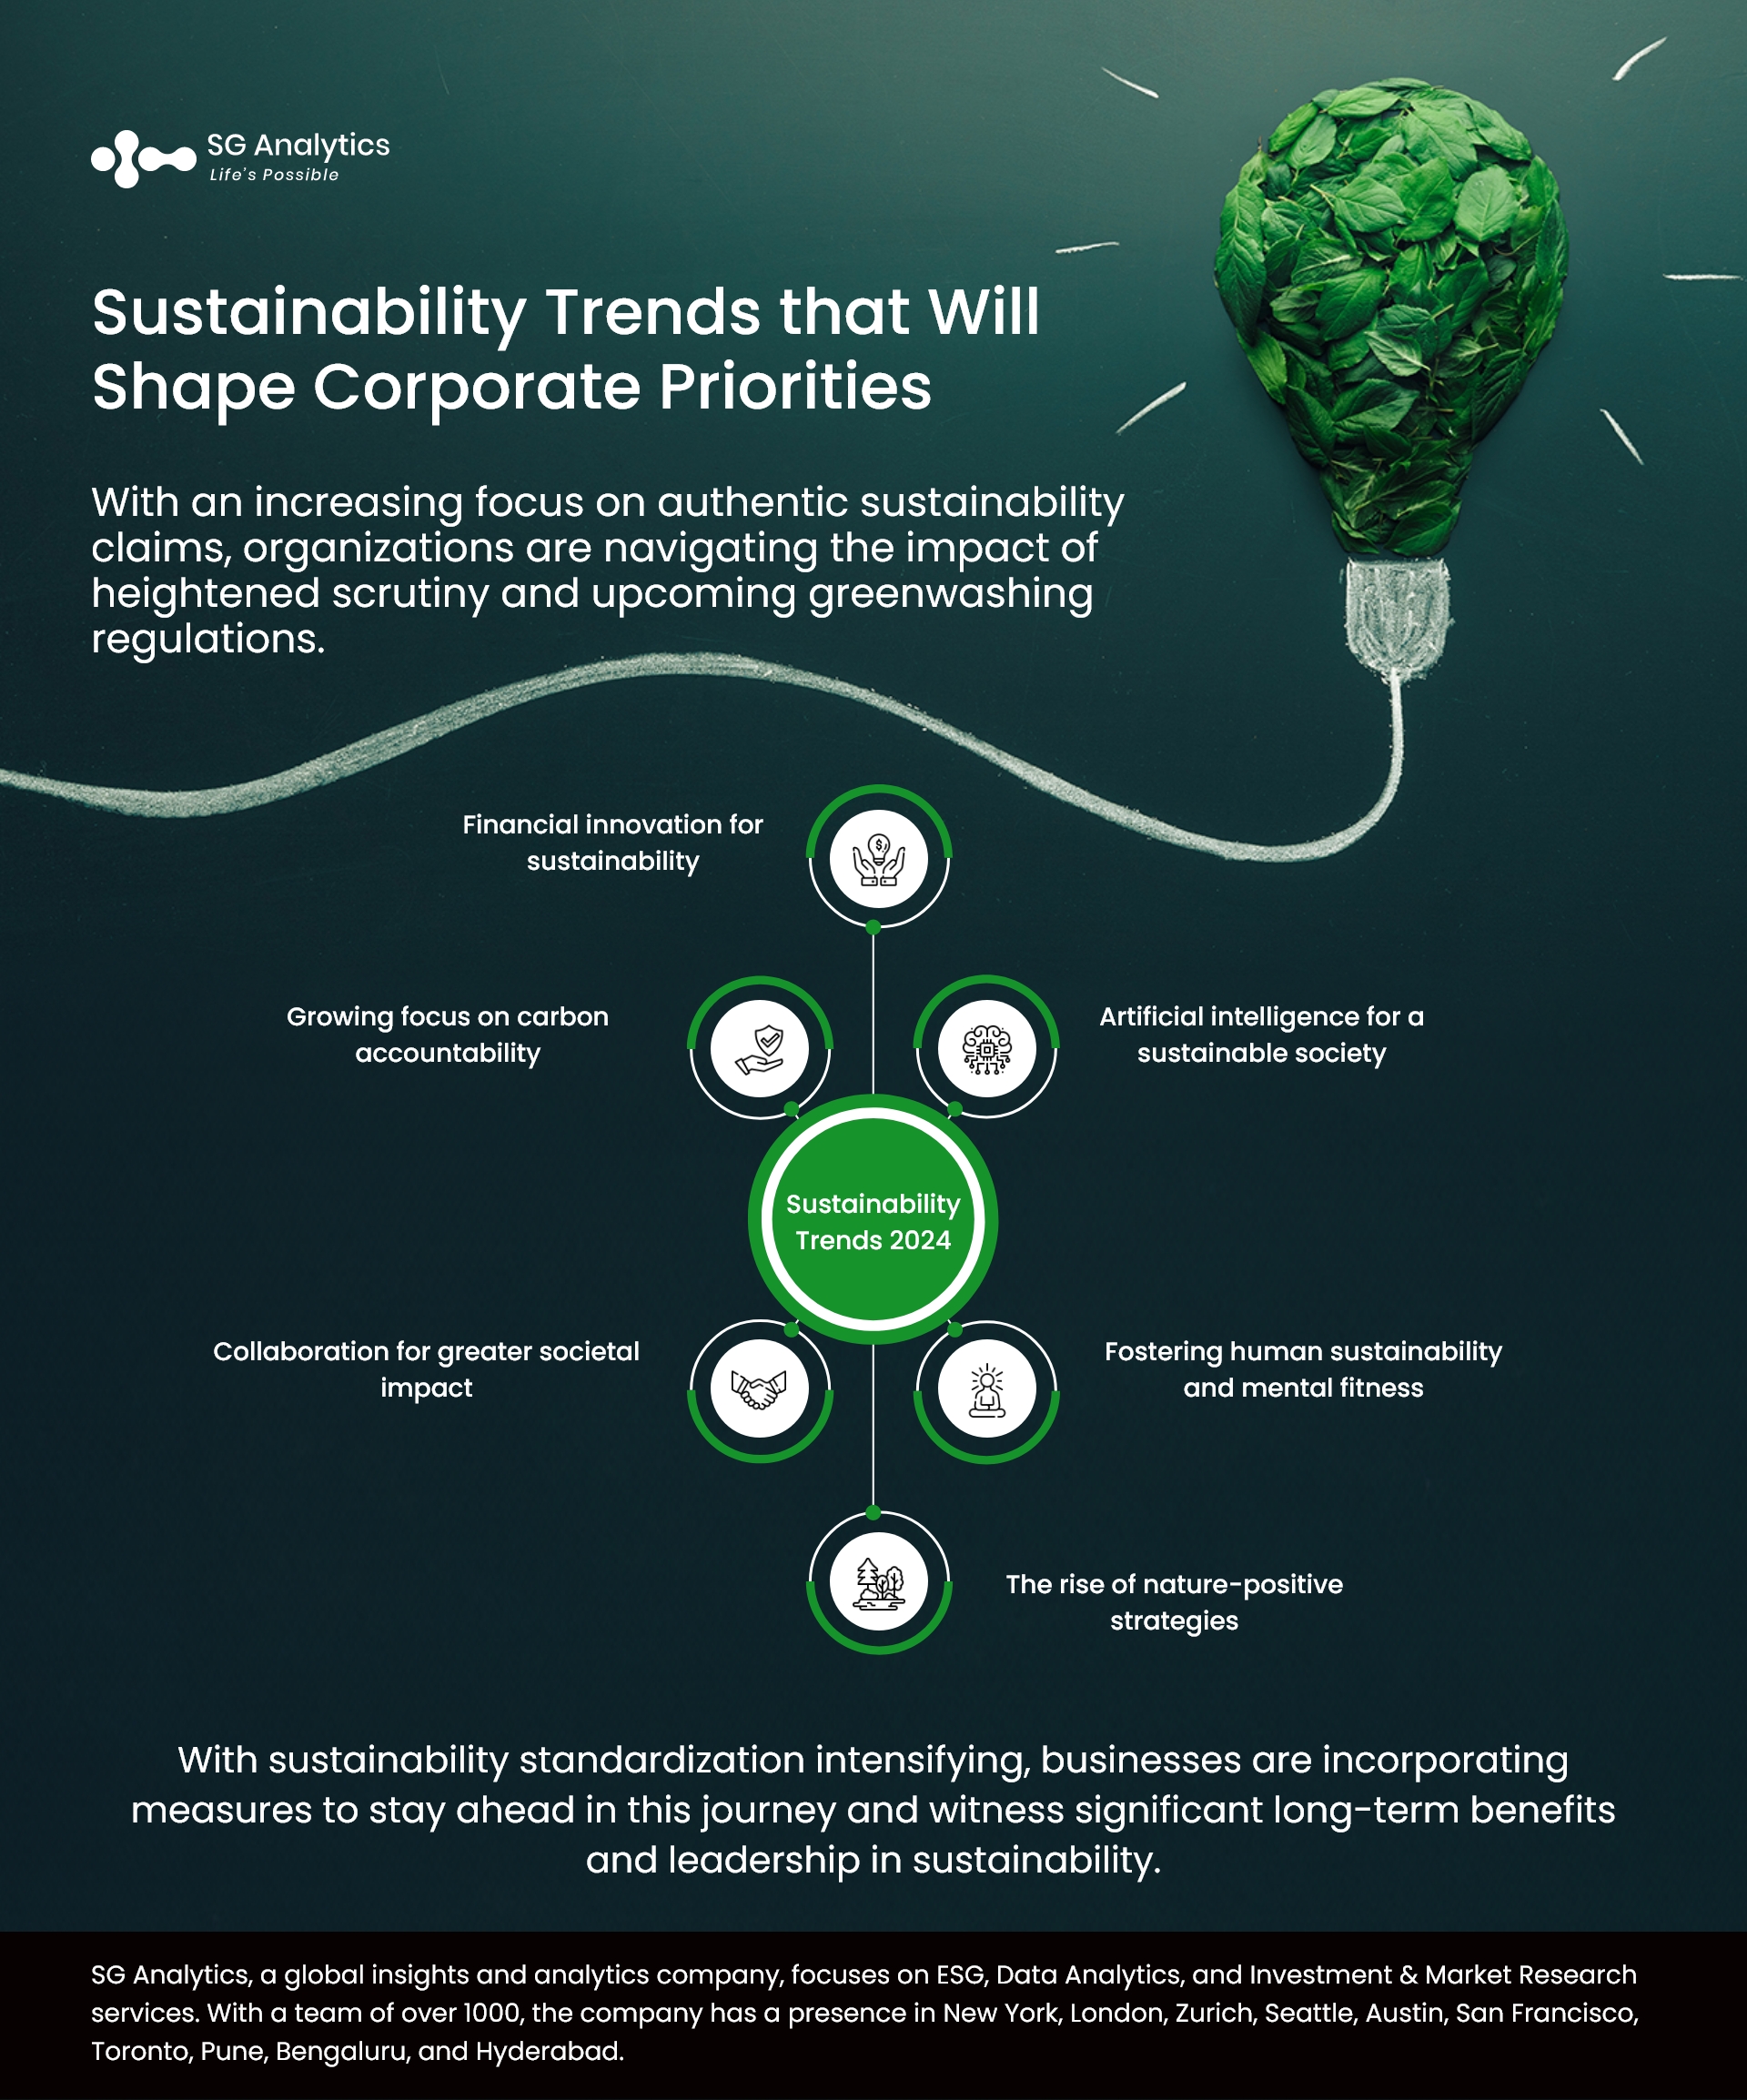 Sustainability Trends that Will Shape Corporate Priorities